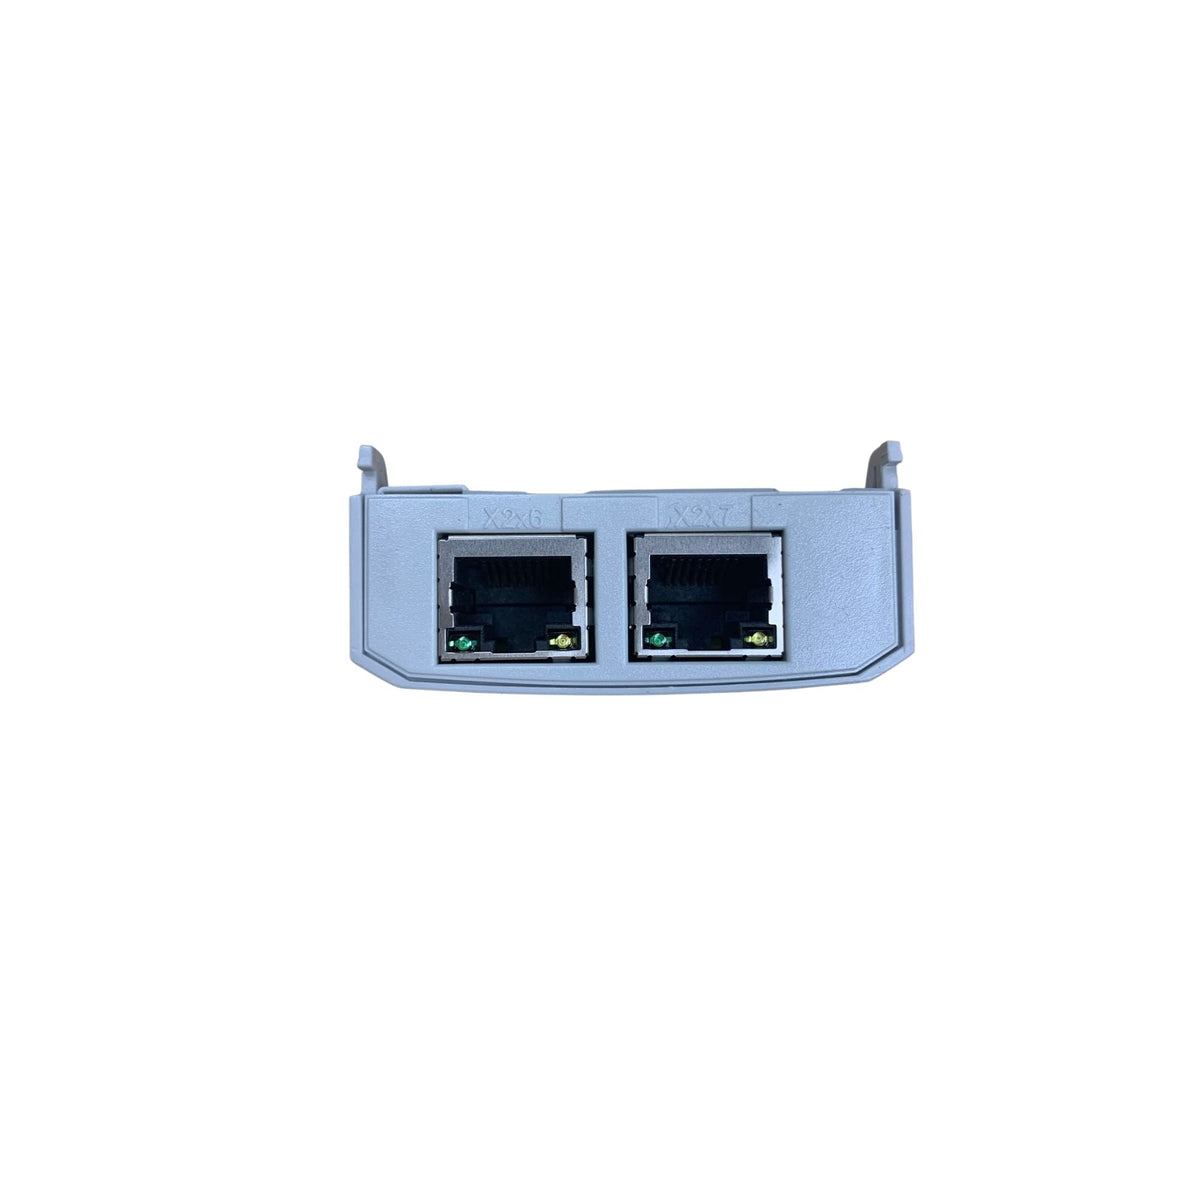 bottom view of a ethernet control unit with two ethernet ports